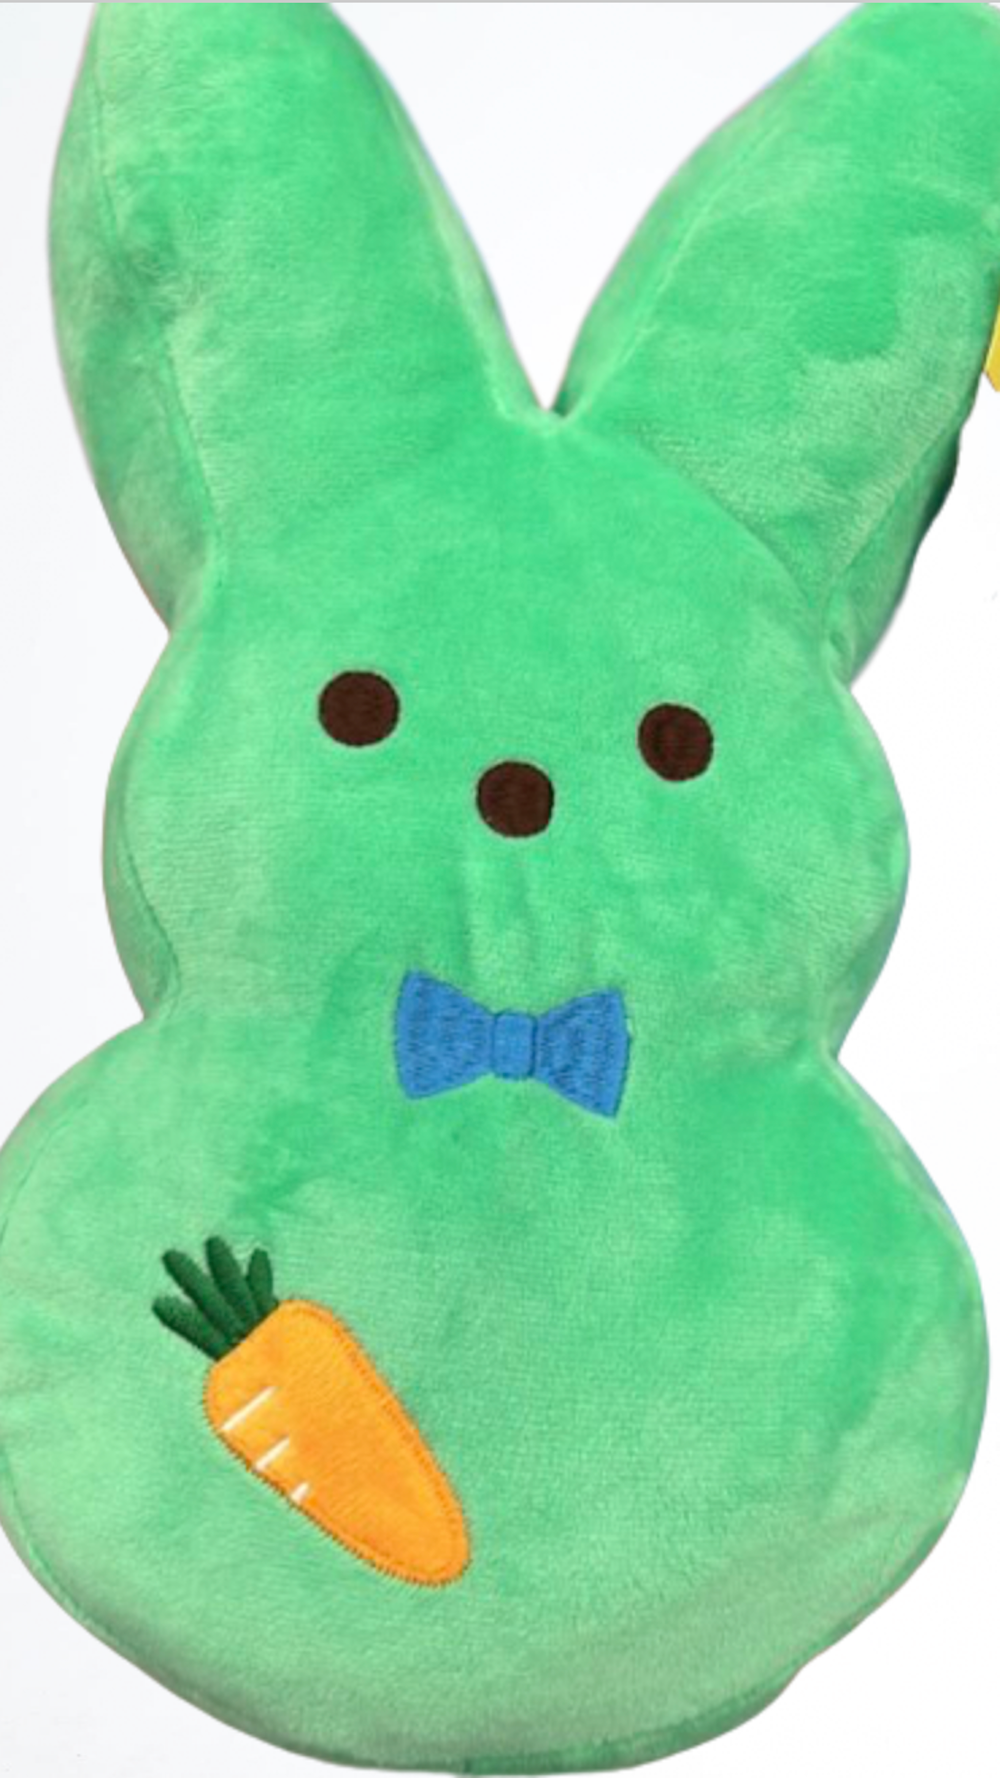 Peeps Easter Peep Bunny Dress Up with Bow Tie Green 13in Plush New with Tag